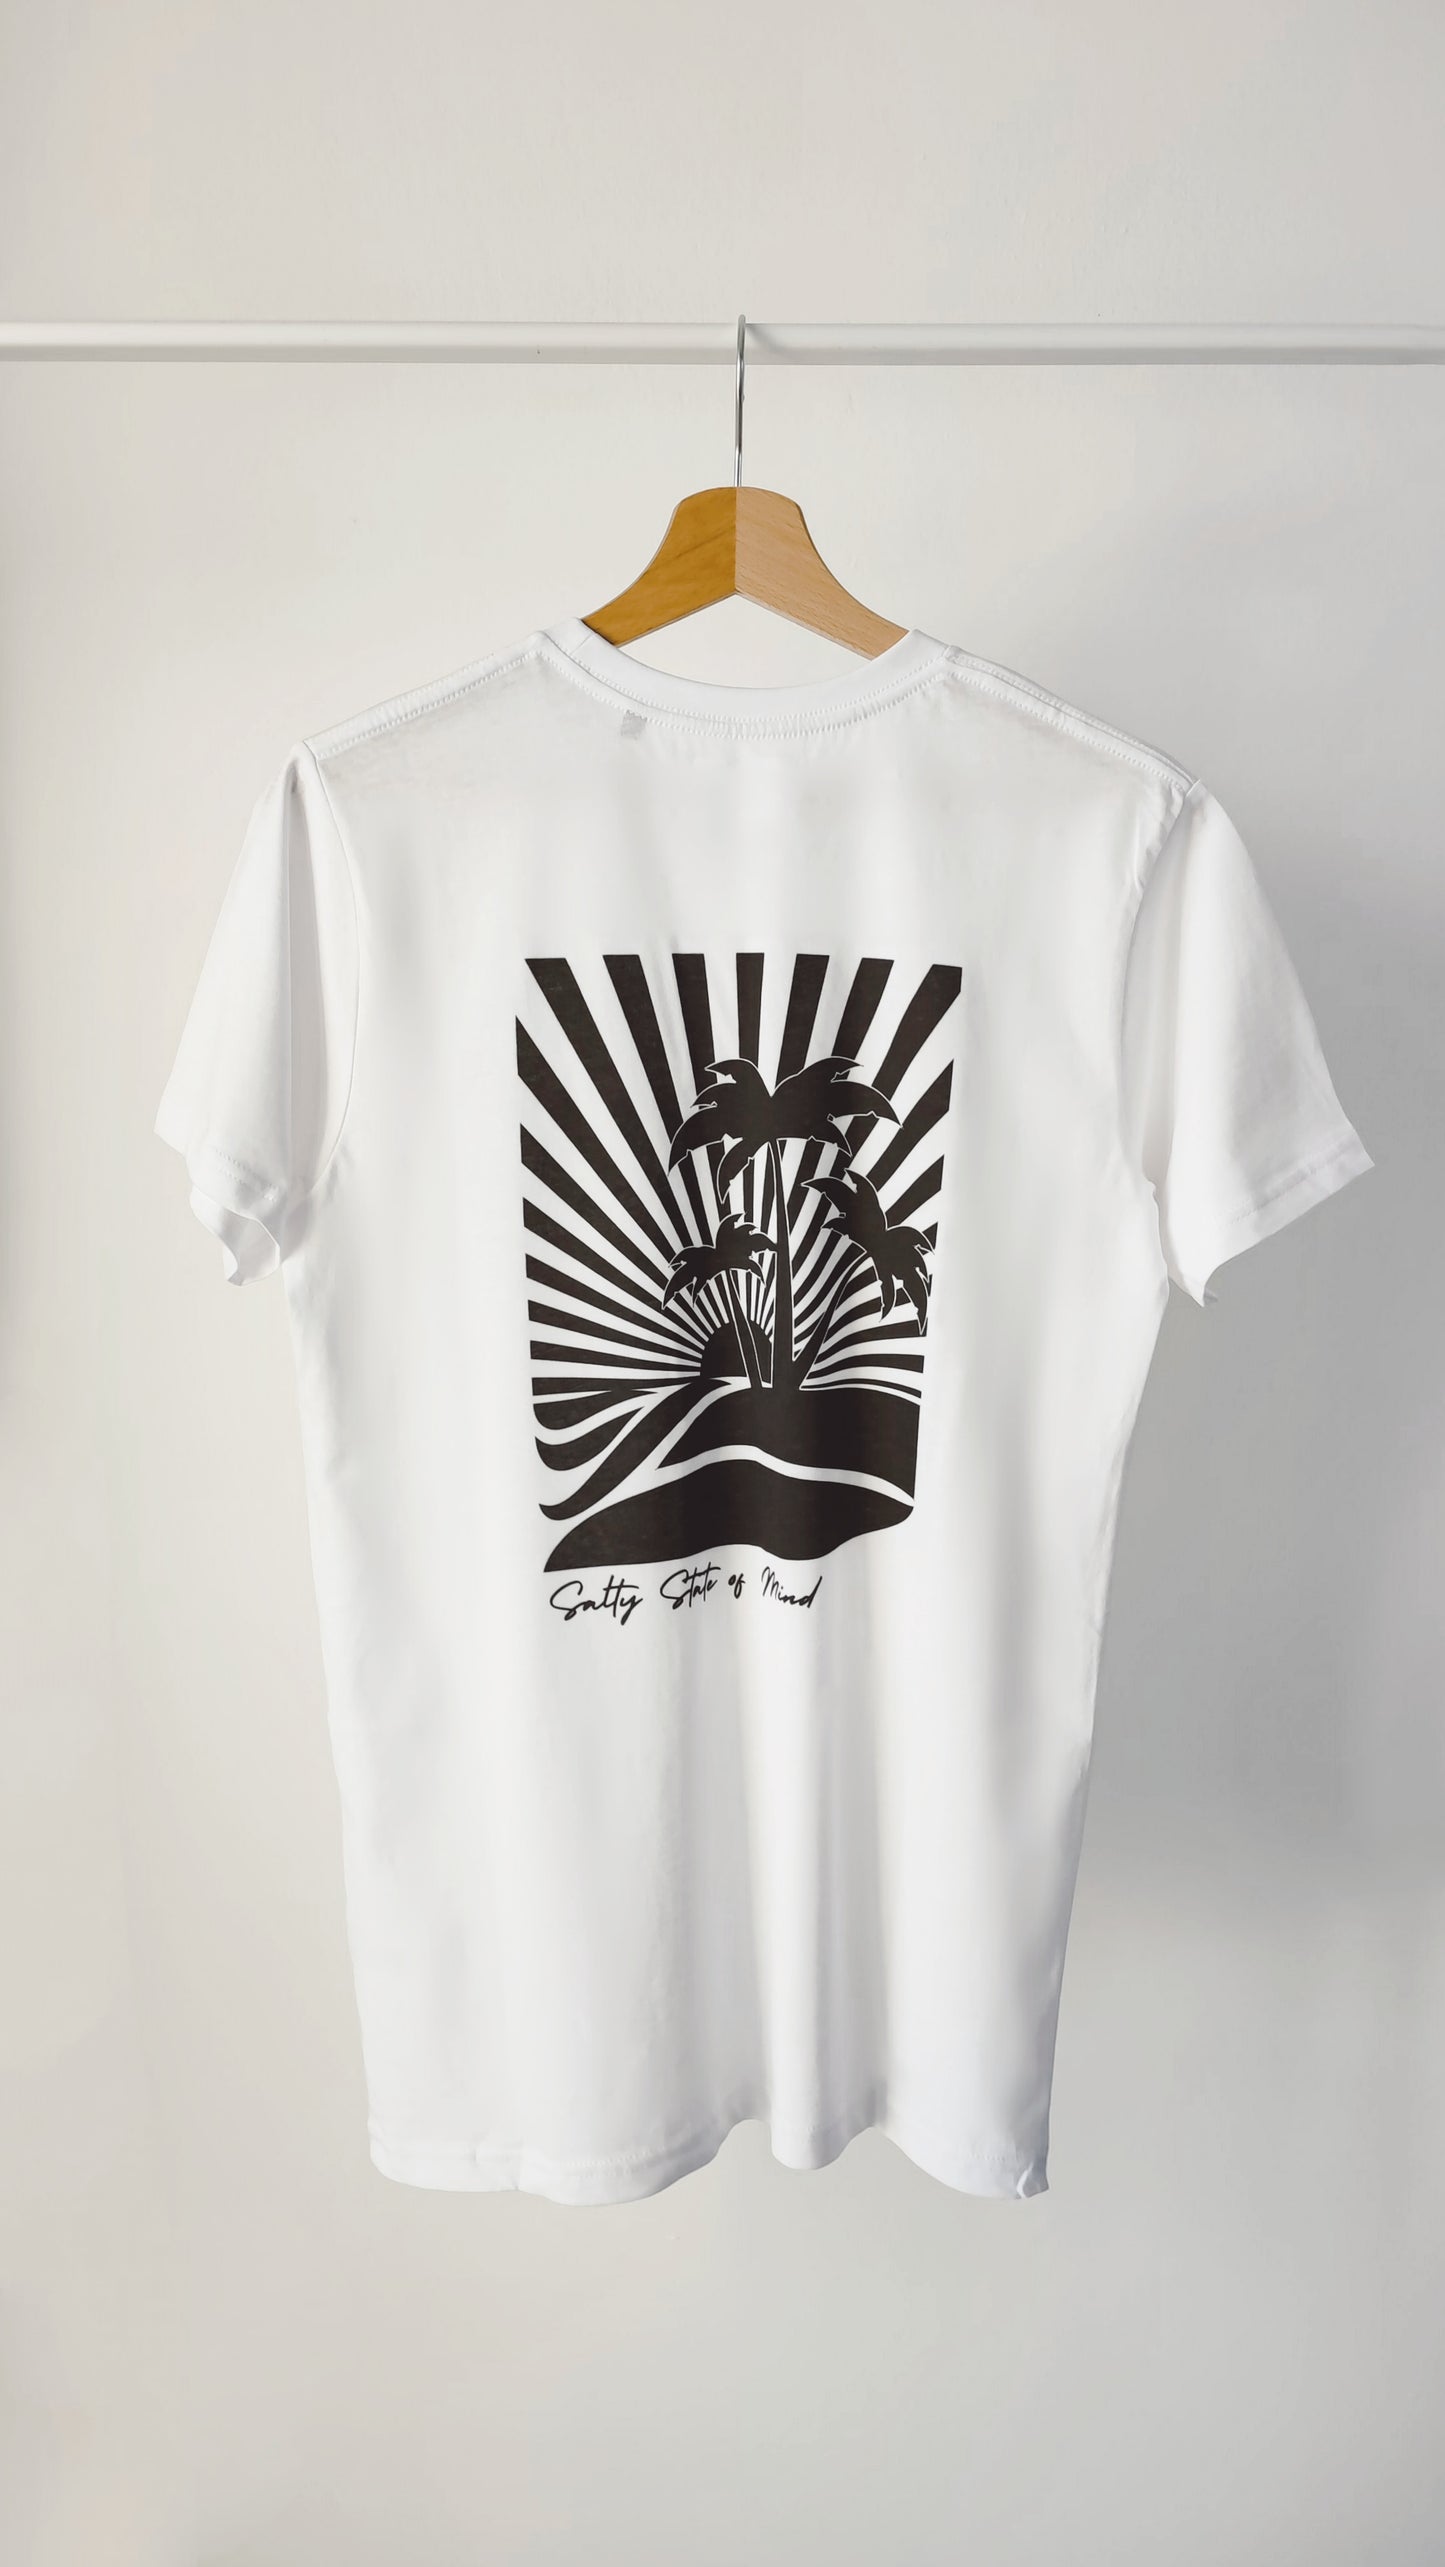 "ISLAND" SALTY STATE OF MIND T-SHIRT